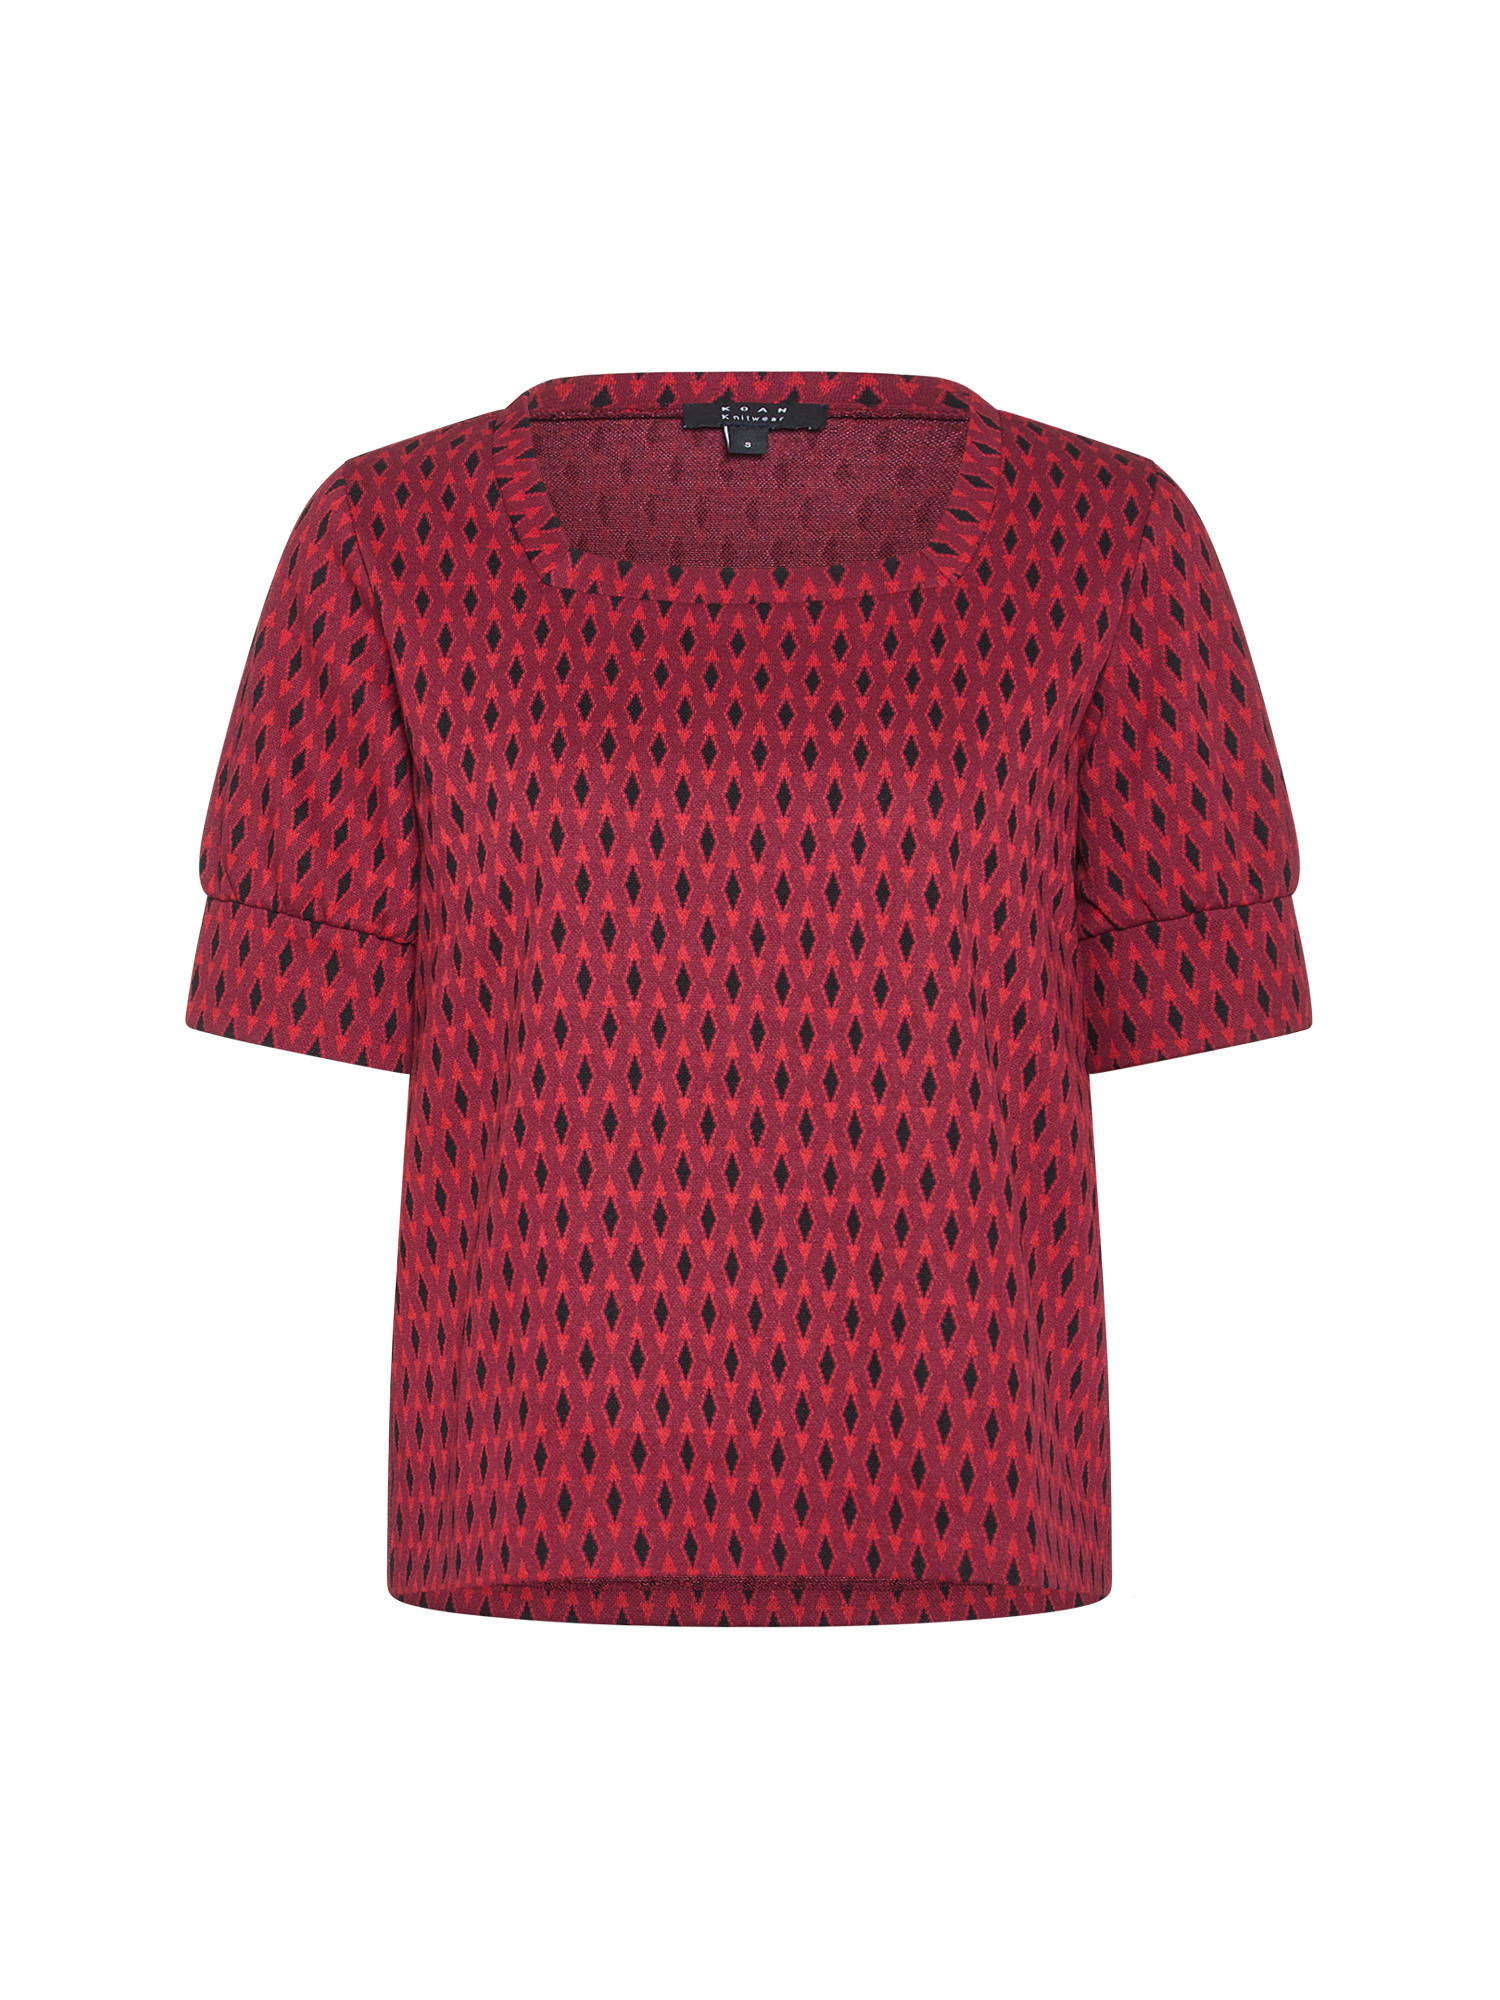 Koan - T-shirt with diamond pattern, Red, large image number 0